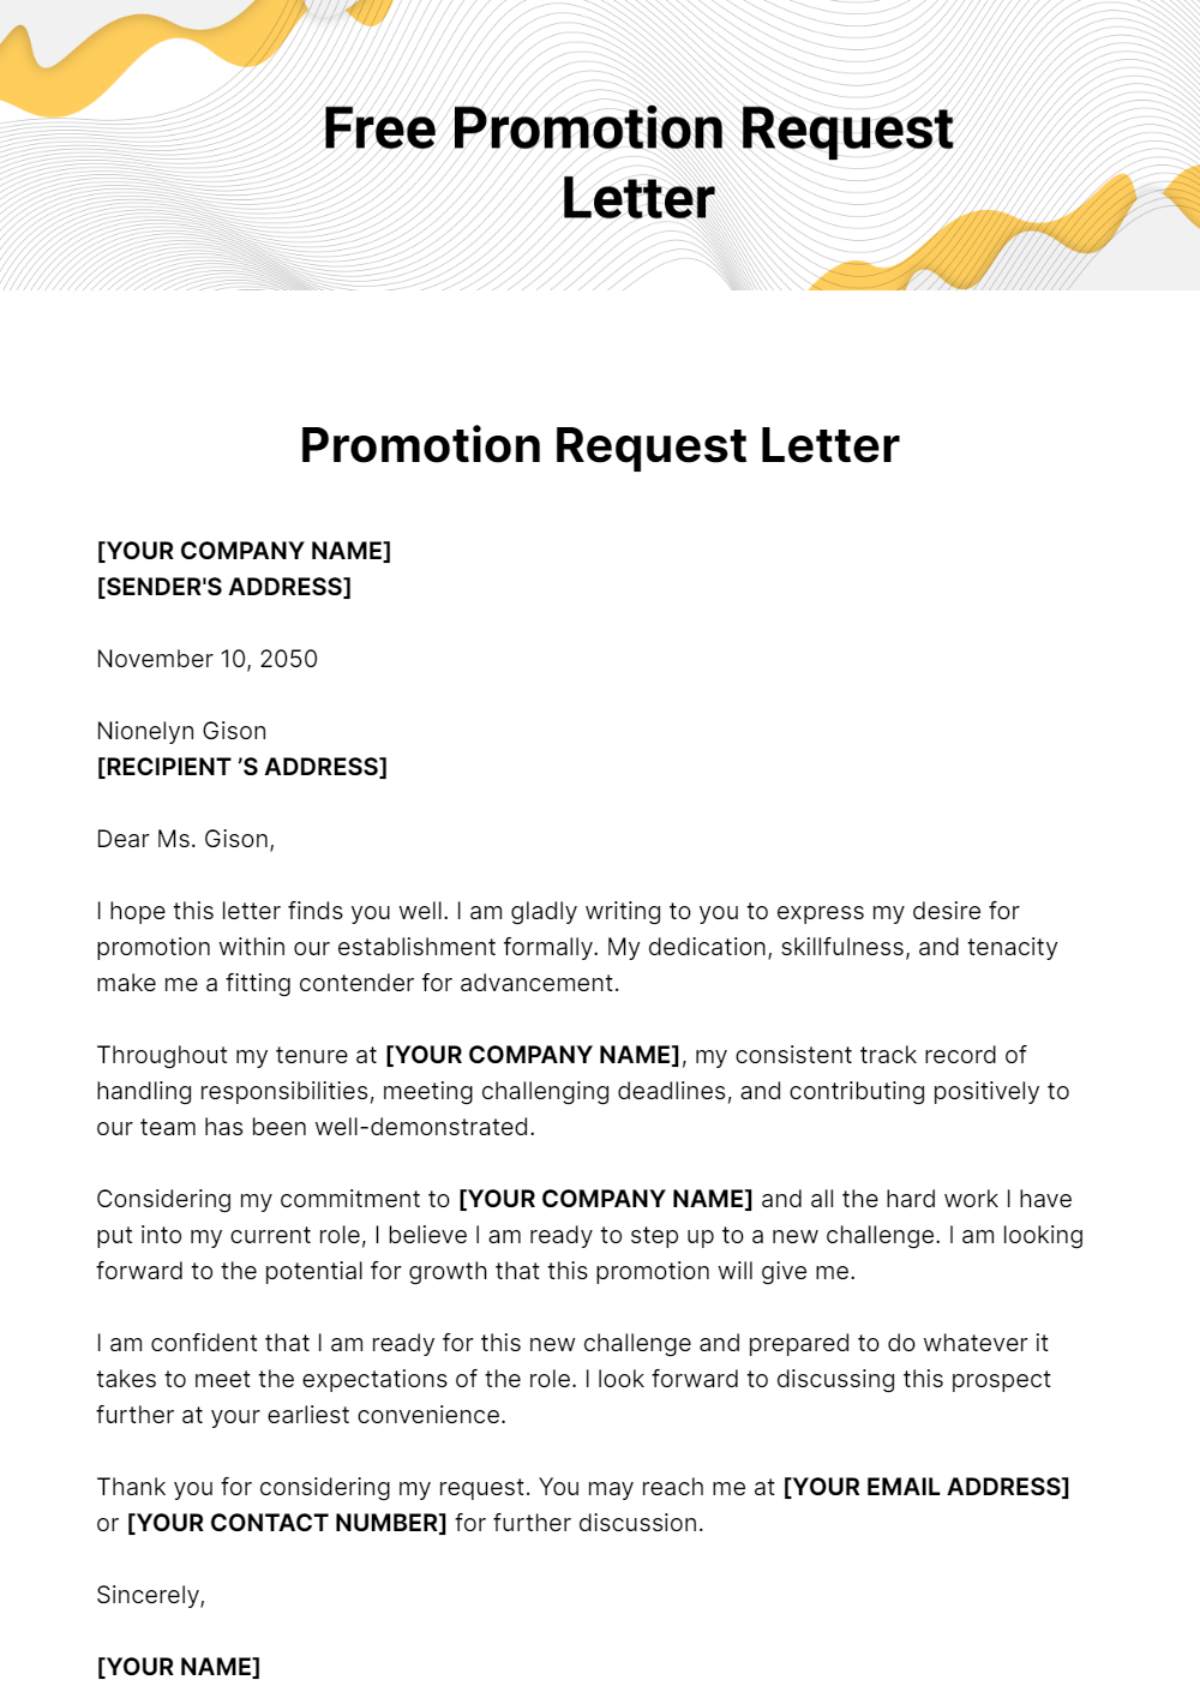 Promotion Request Letter Template